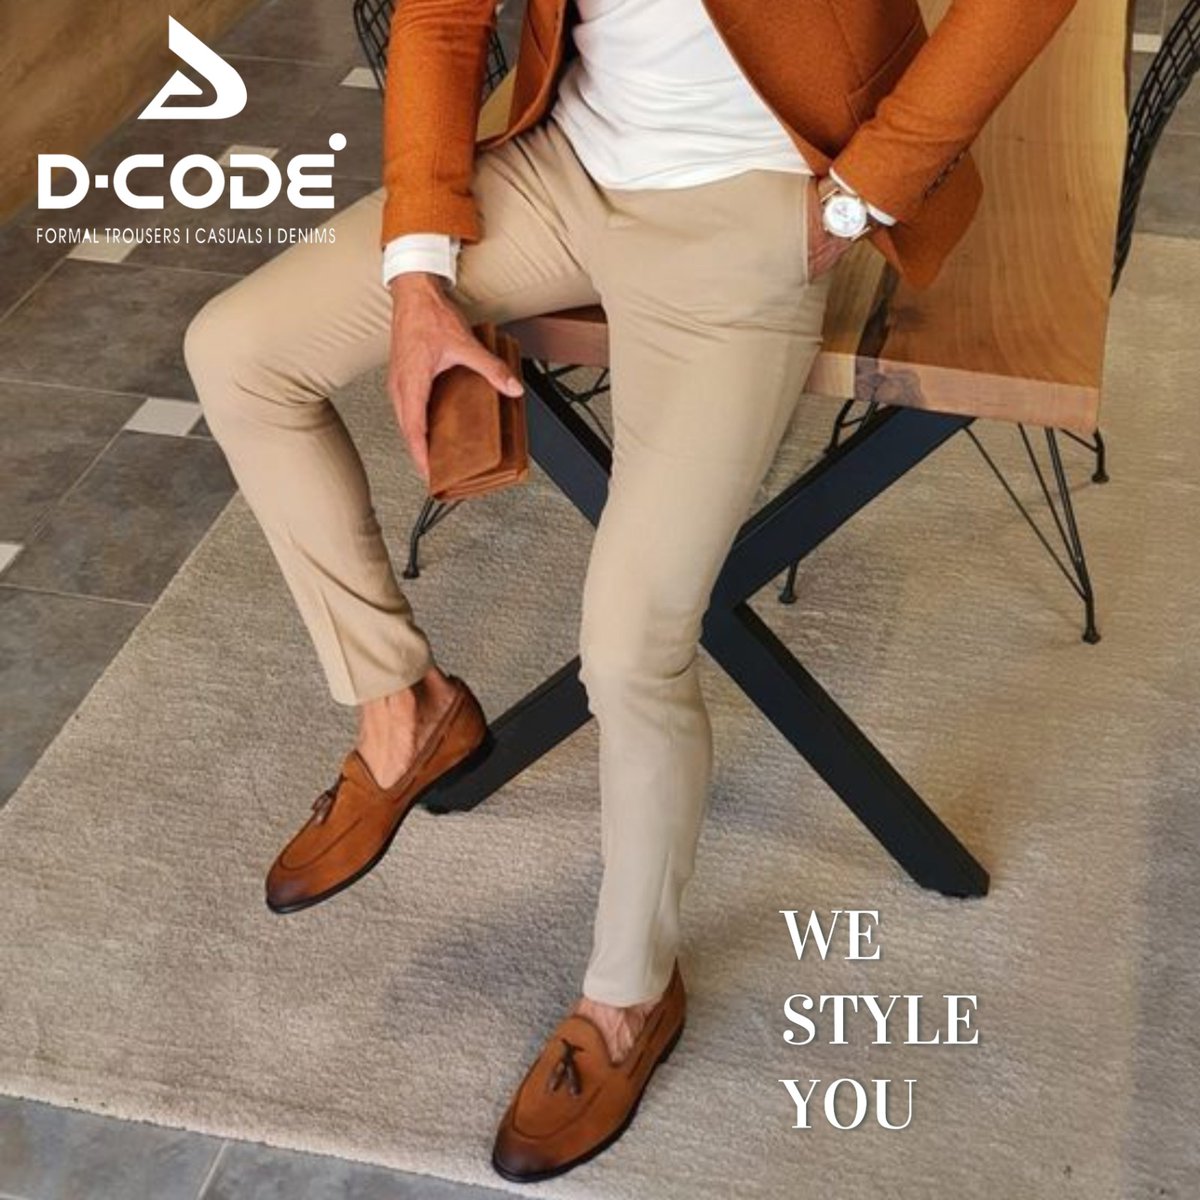 Stepping into success, one tailored trousers at a time. 👞 #MensFashion #DapperGent #CasualElegance #Menswear #FashionForward #ClassicLook #SharpDressedMan #MensStyle #StylishShirts #TimelessFashion #MensWardrobe #dcode